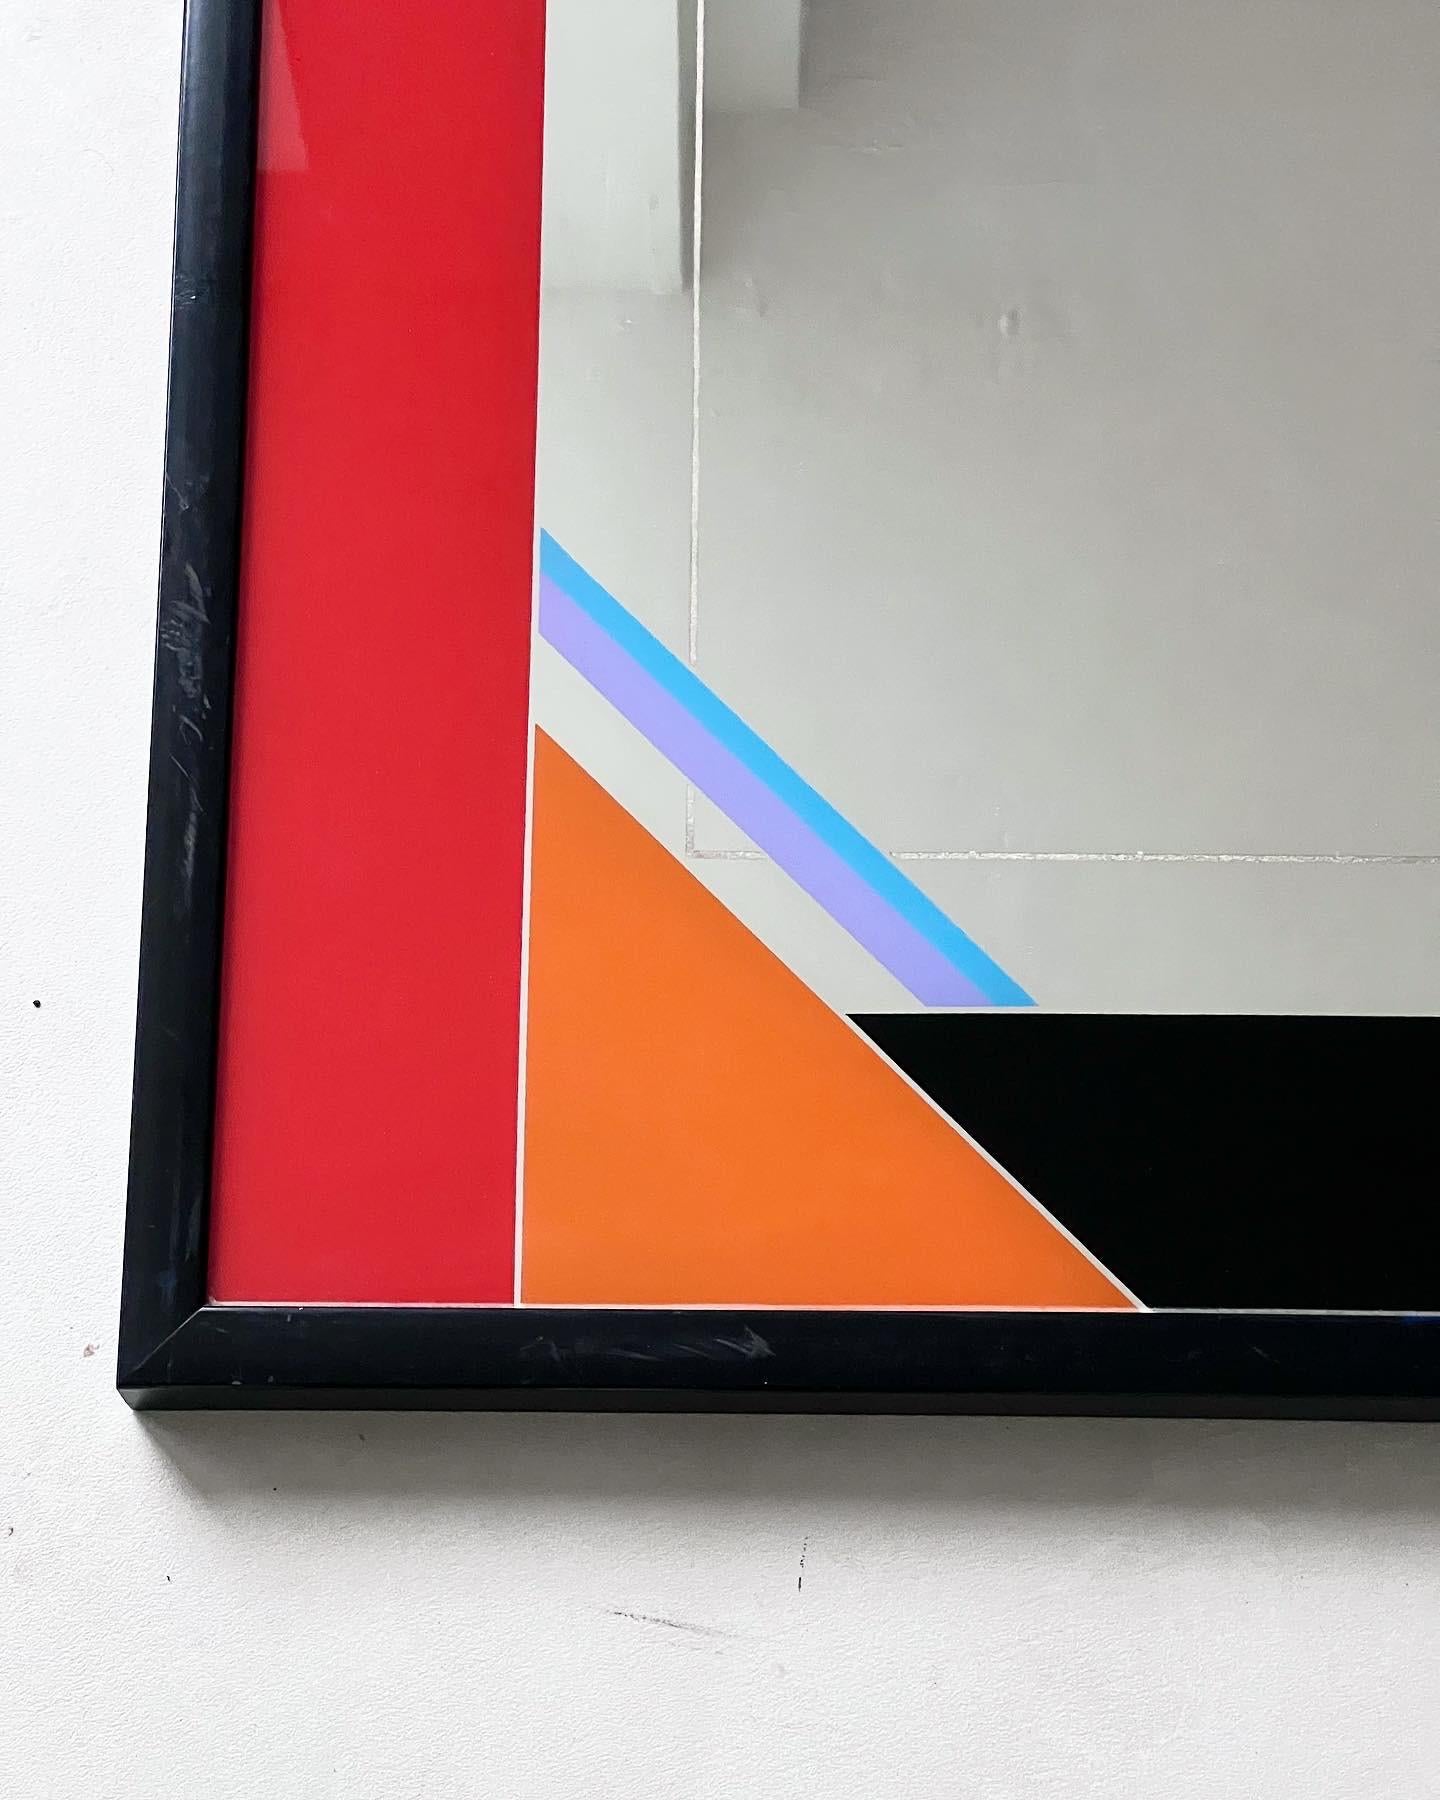 Decorative wall mounted mirror designed by artist Eugenio Carmi for italian furniture brand Acerbis and manufactured in the 1980s. Its an exquisite Space Age Era artifact, and its vibrant colors and geometric pattern closely echo the inspirations of